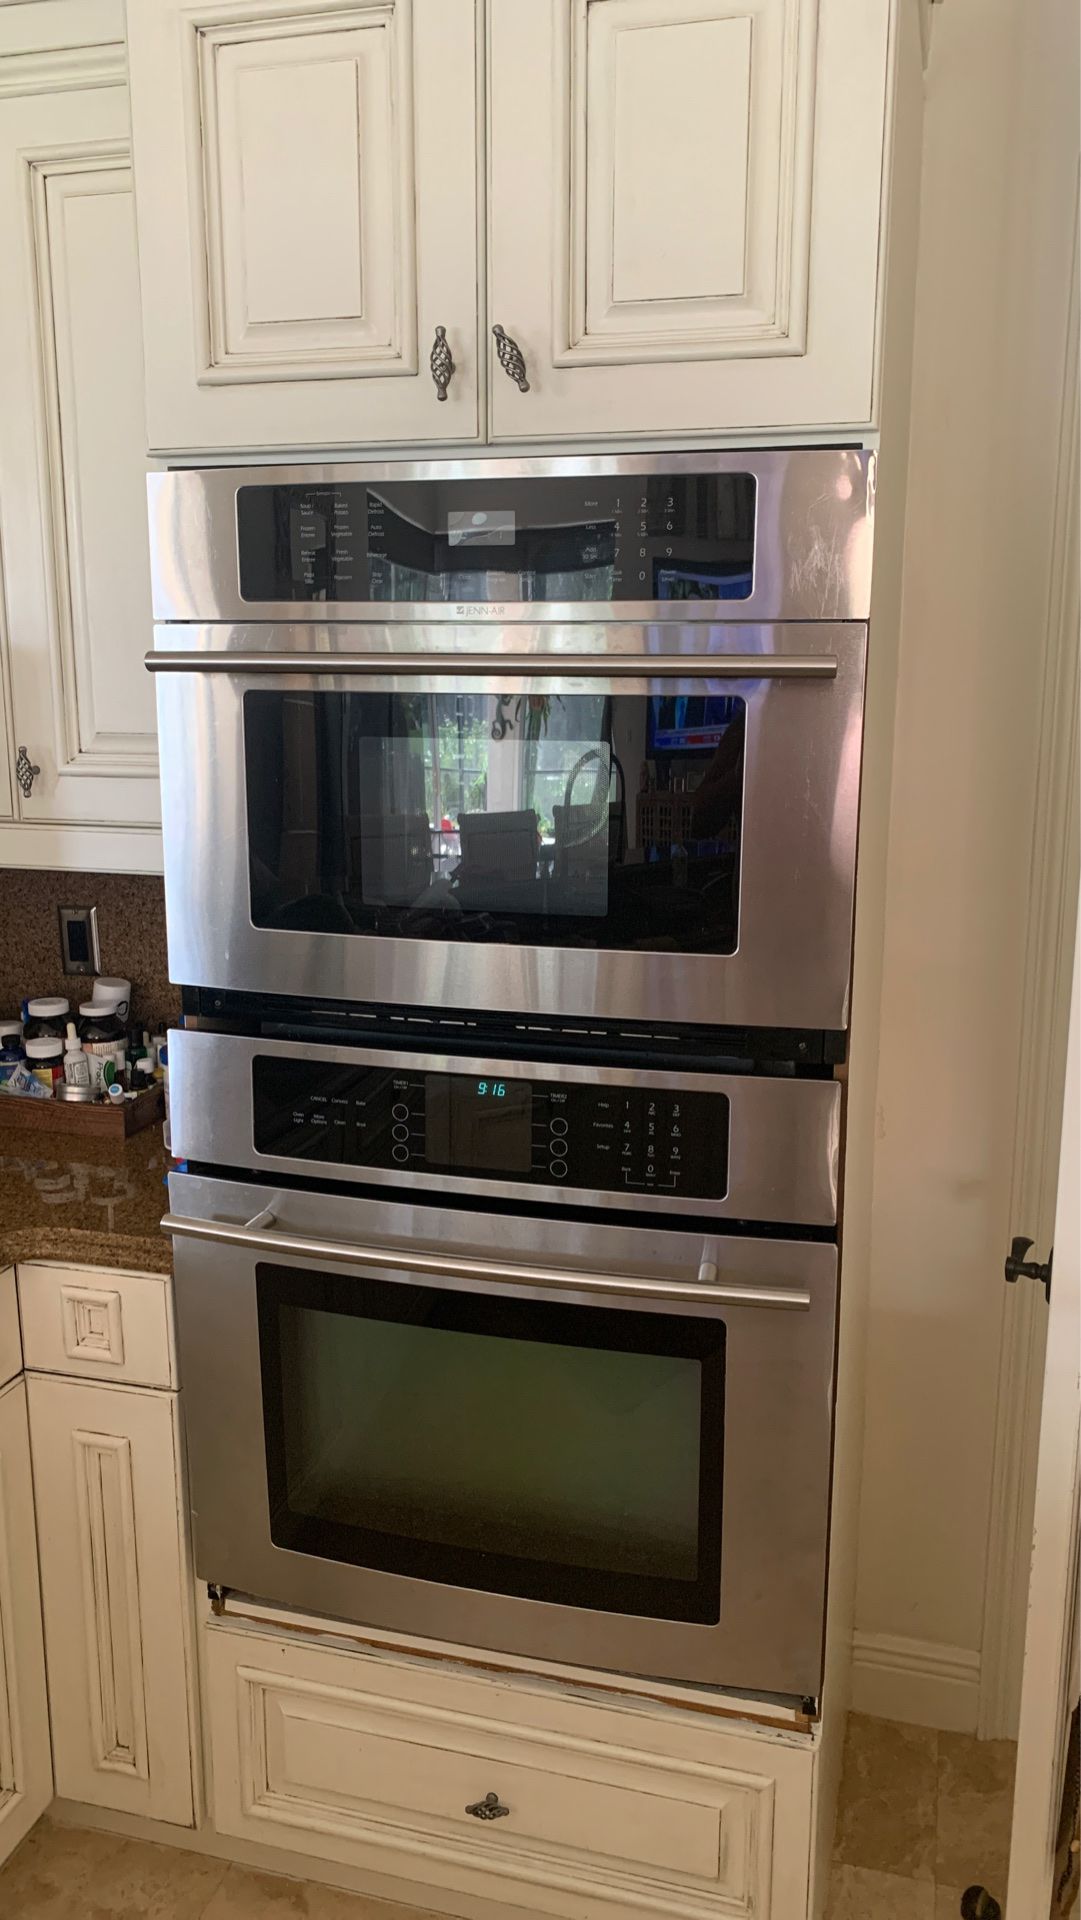 Jenn-Air combo WALL OVEN AND MICROWAVE STAINLESS STEEL NO DENTS